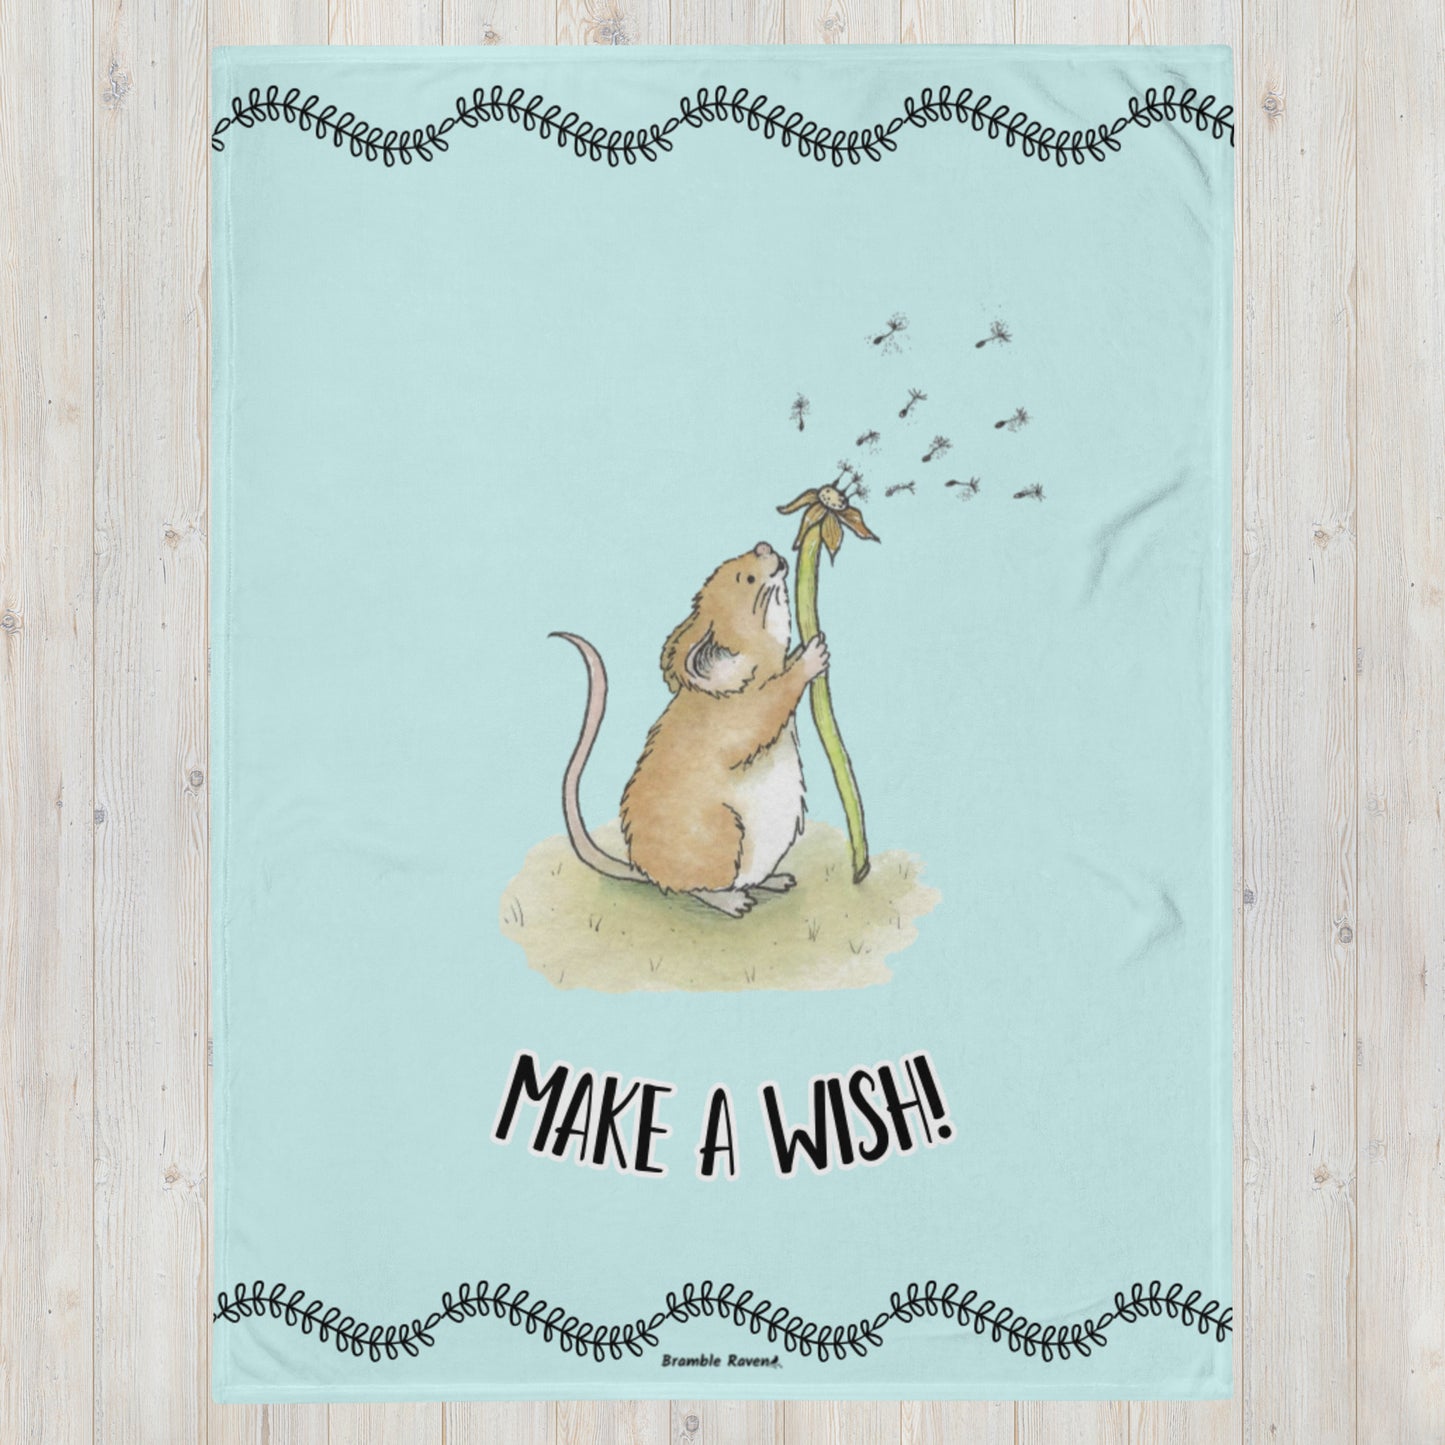 Original Dandelion Wish design of cute watercolor mouse blowing dandelion seeds on a light blue background. Black vine border on top and bottom. Make a Wish phrase below mouse graphic. 60 by 80 inch throw blanket. 